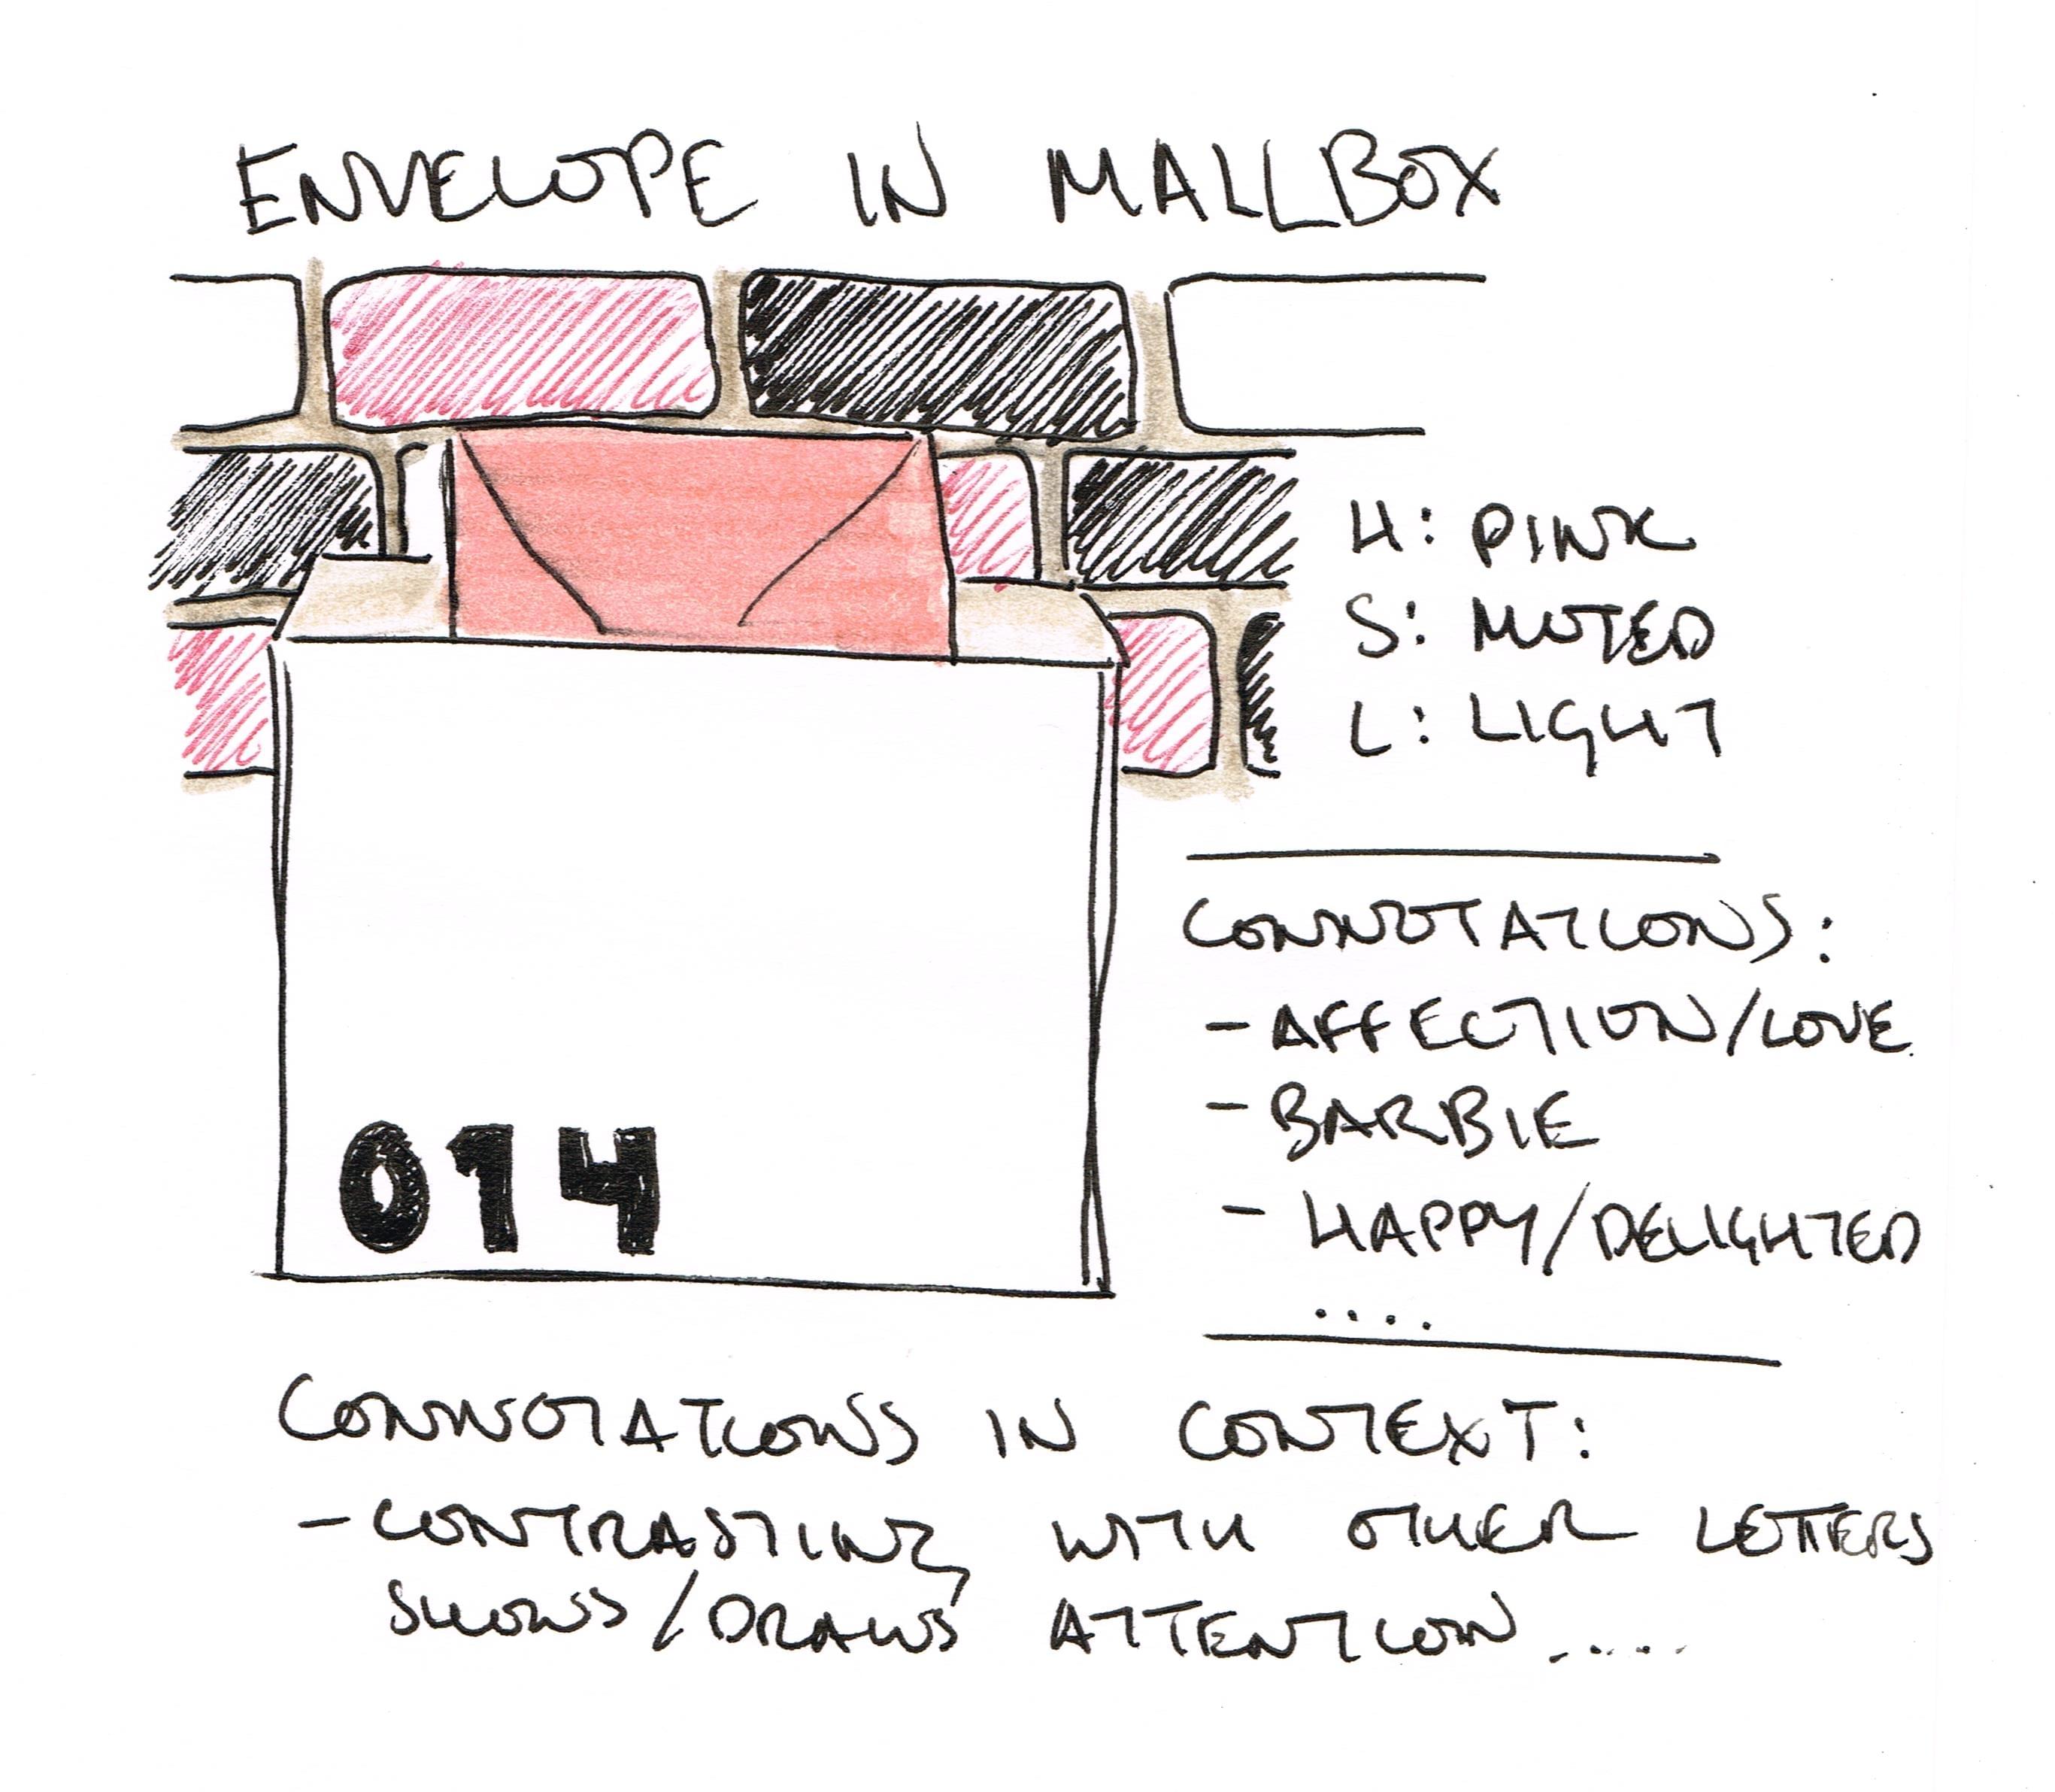 A sketch showing a pink envelope sticking out of a mailbox with notes alongside indicating the colour terminology, connotations and context